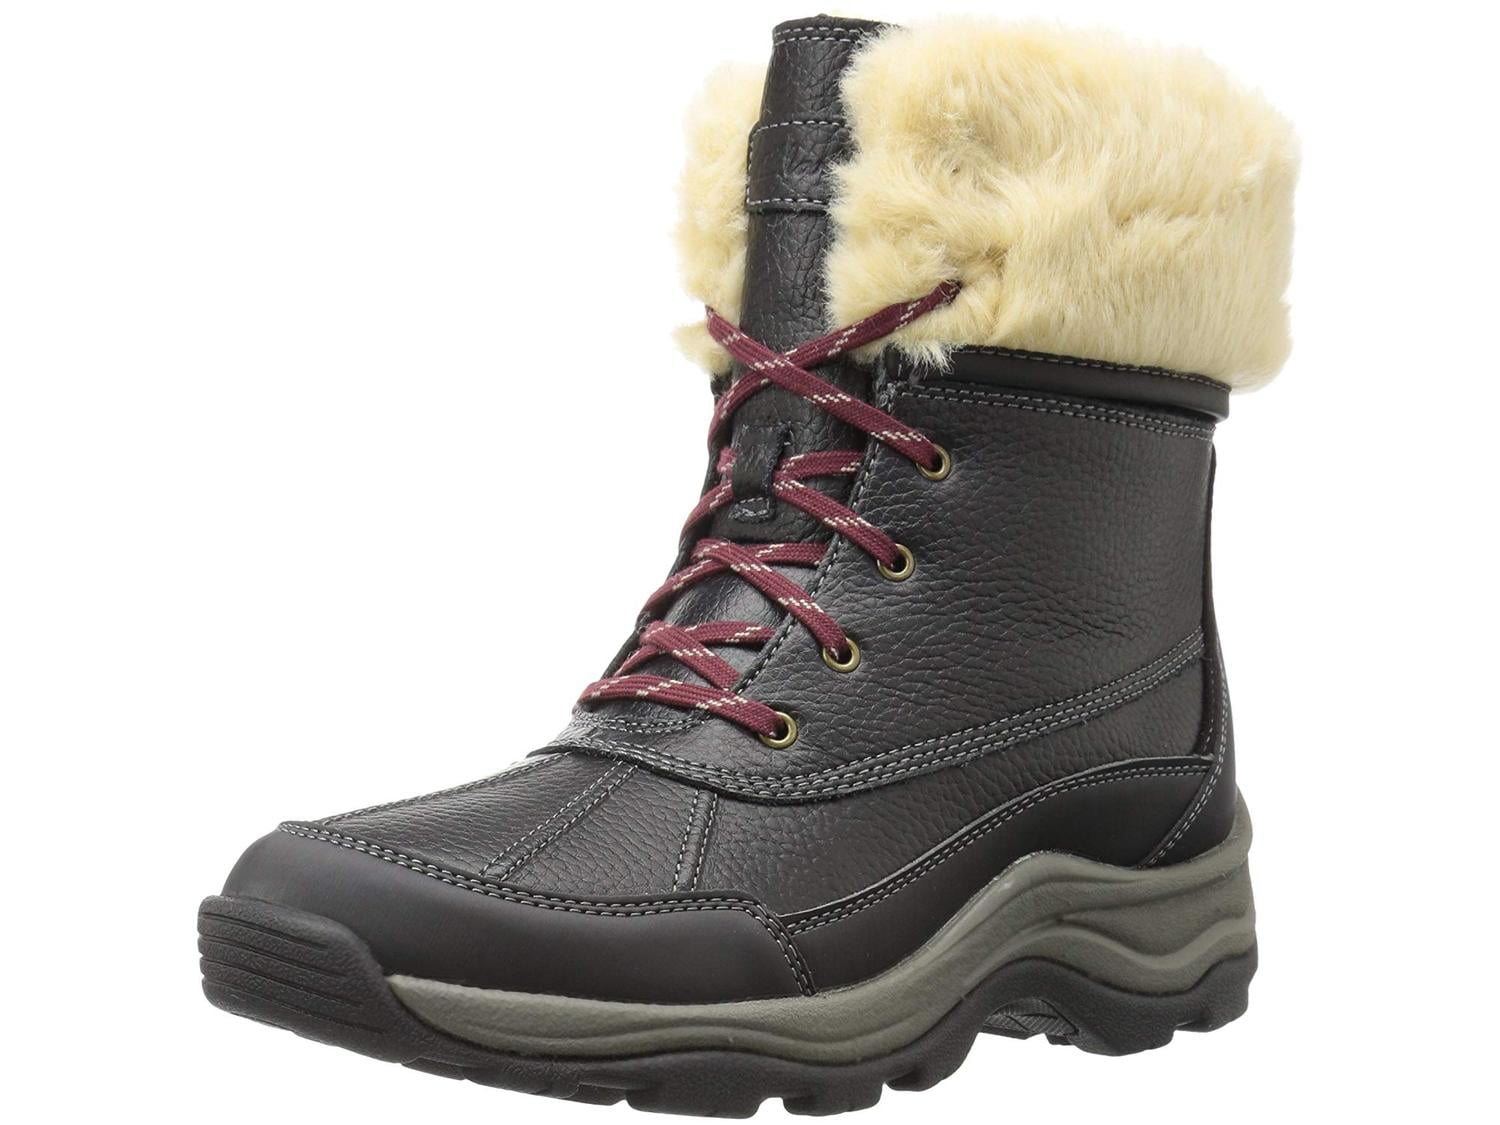 clarks canada womens boots